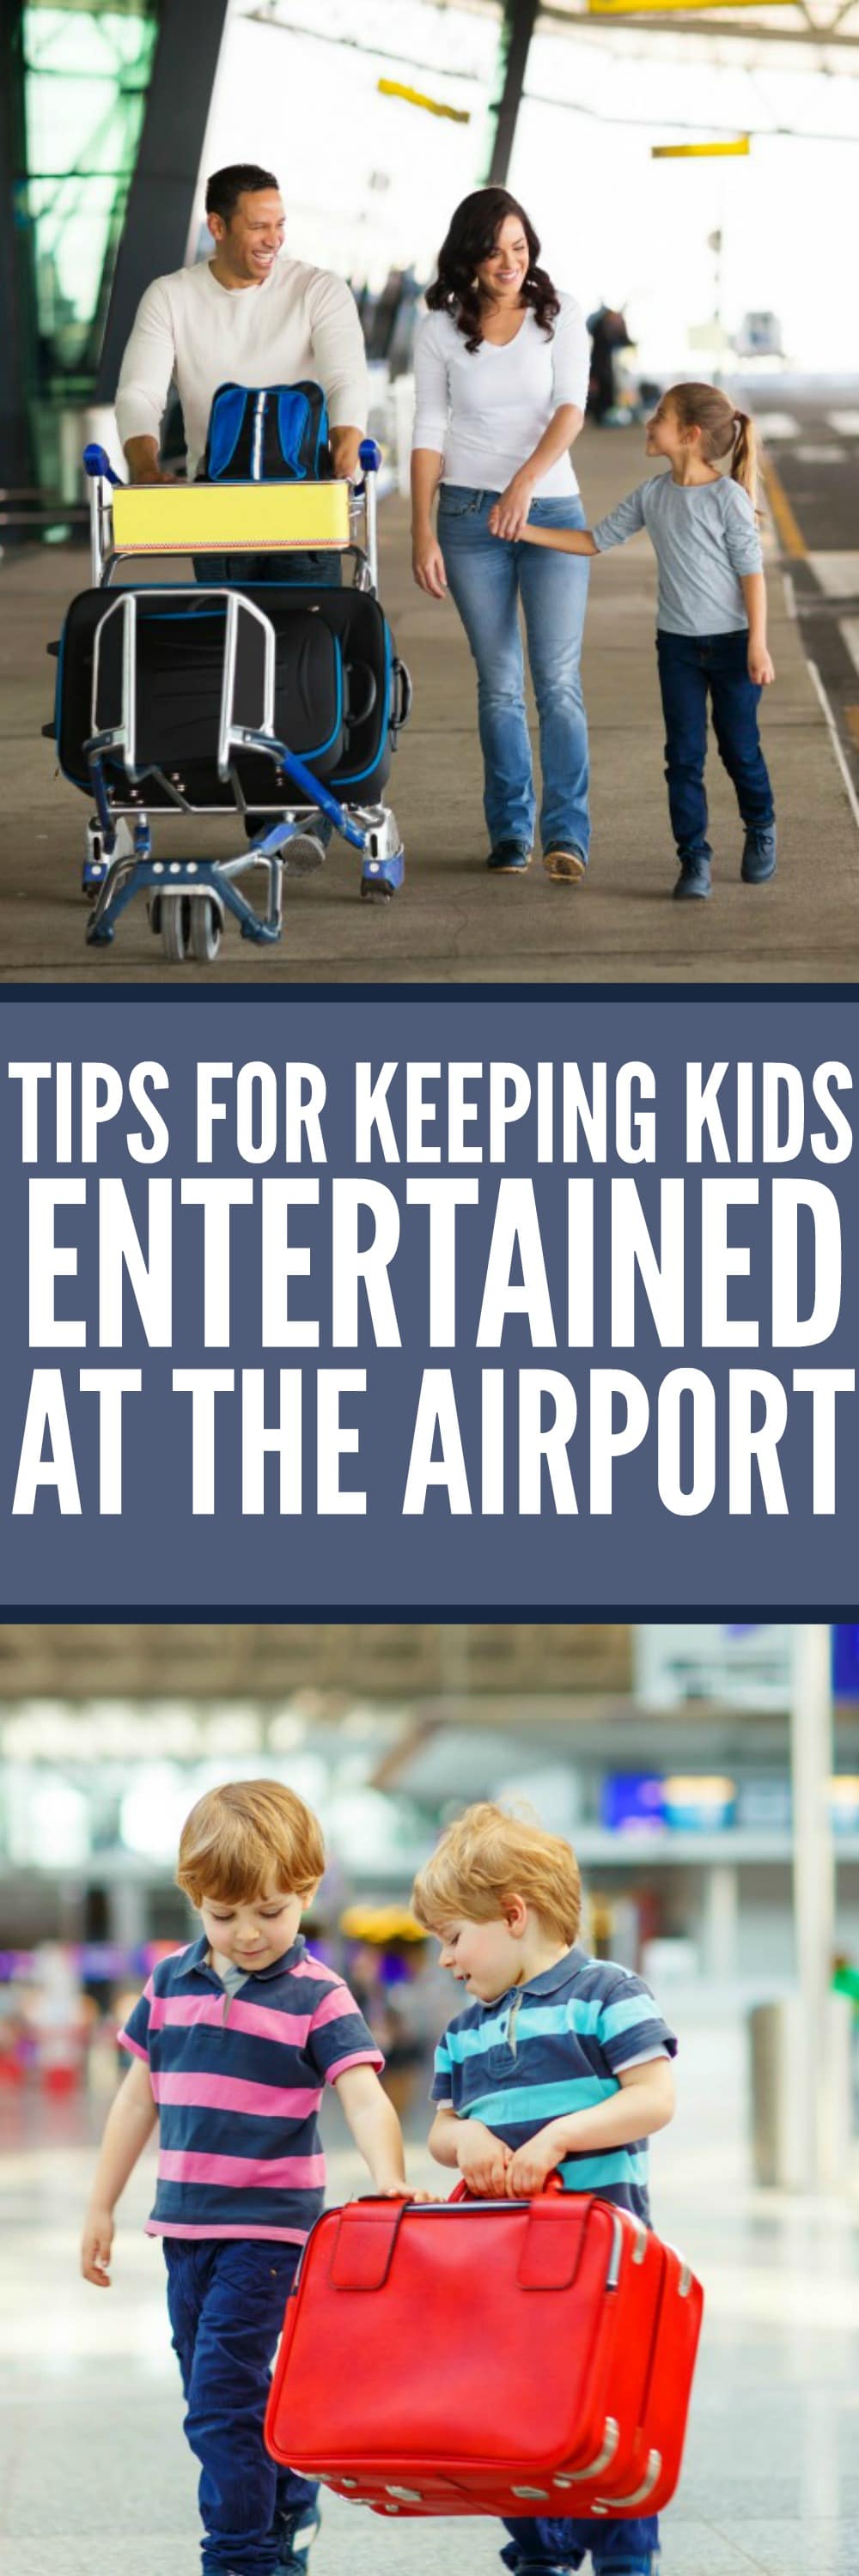 Tips for Keeping Kids Entertained at the Airport